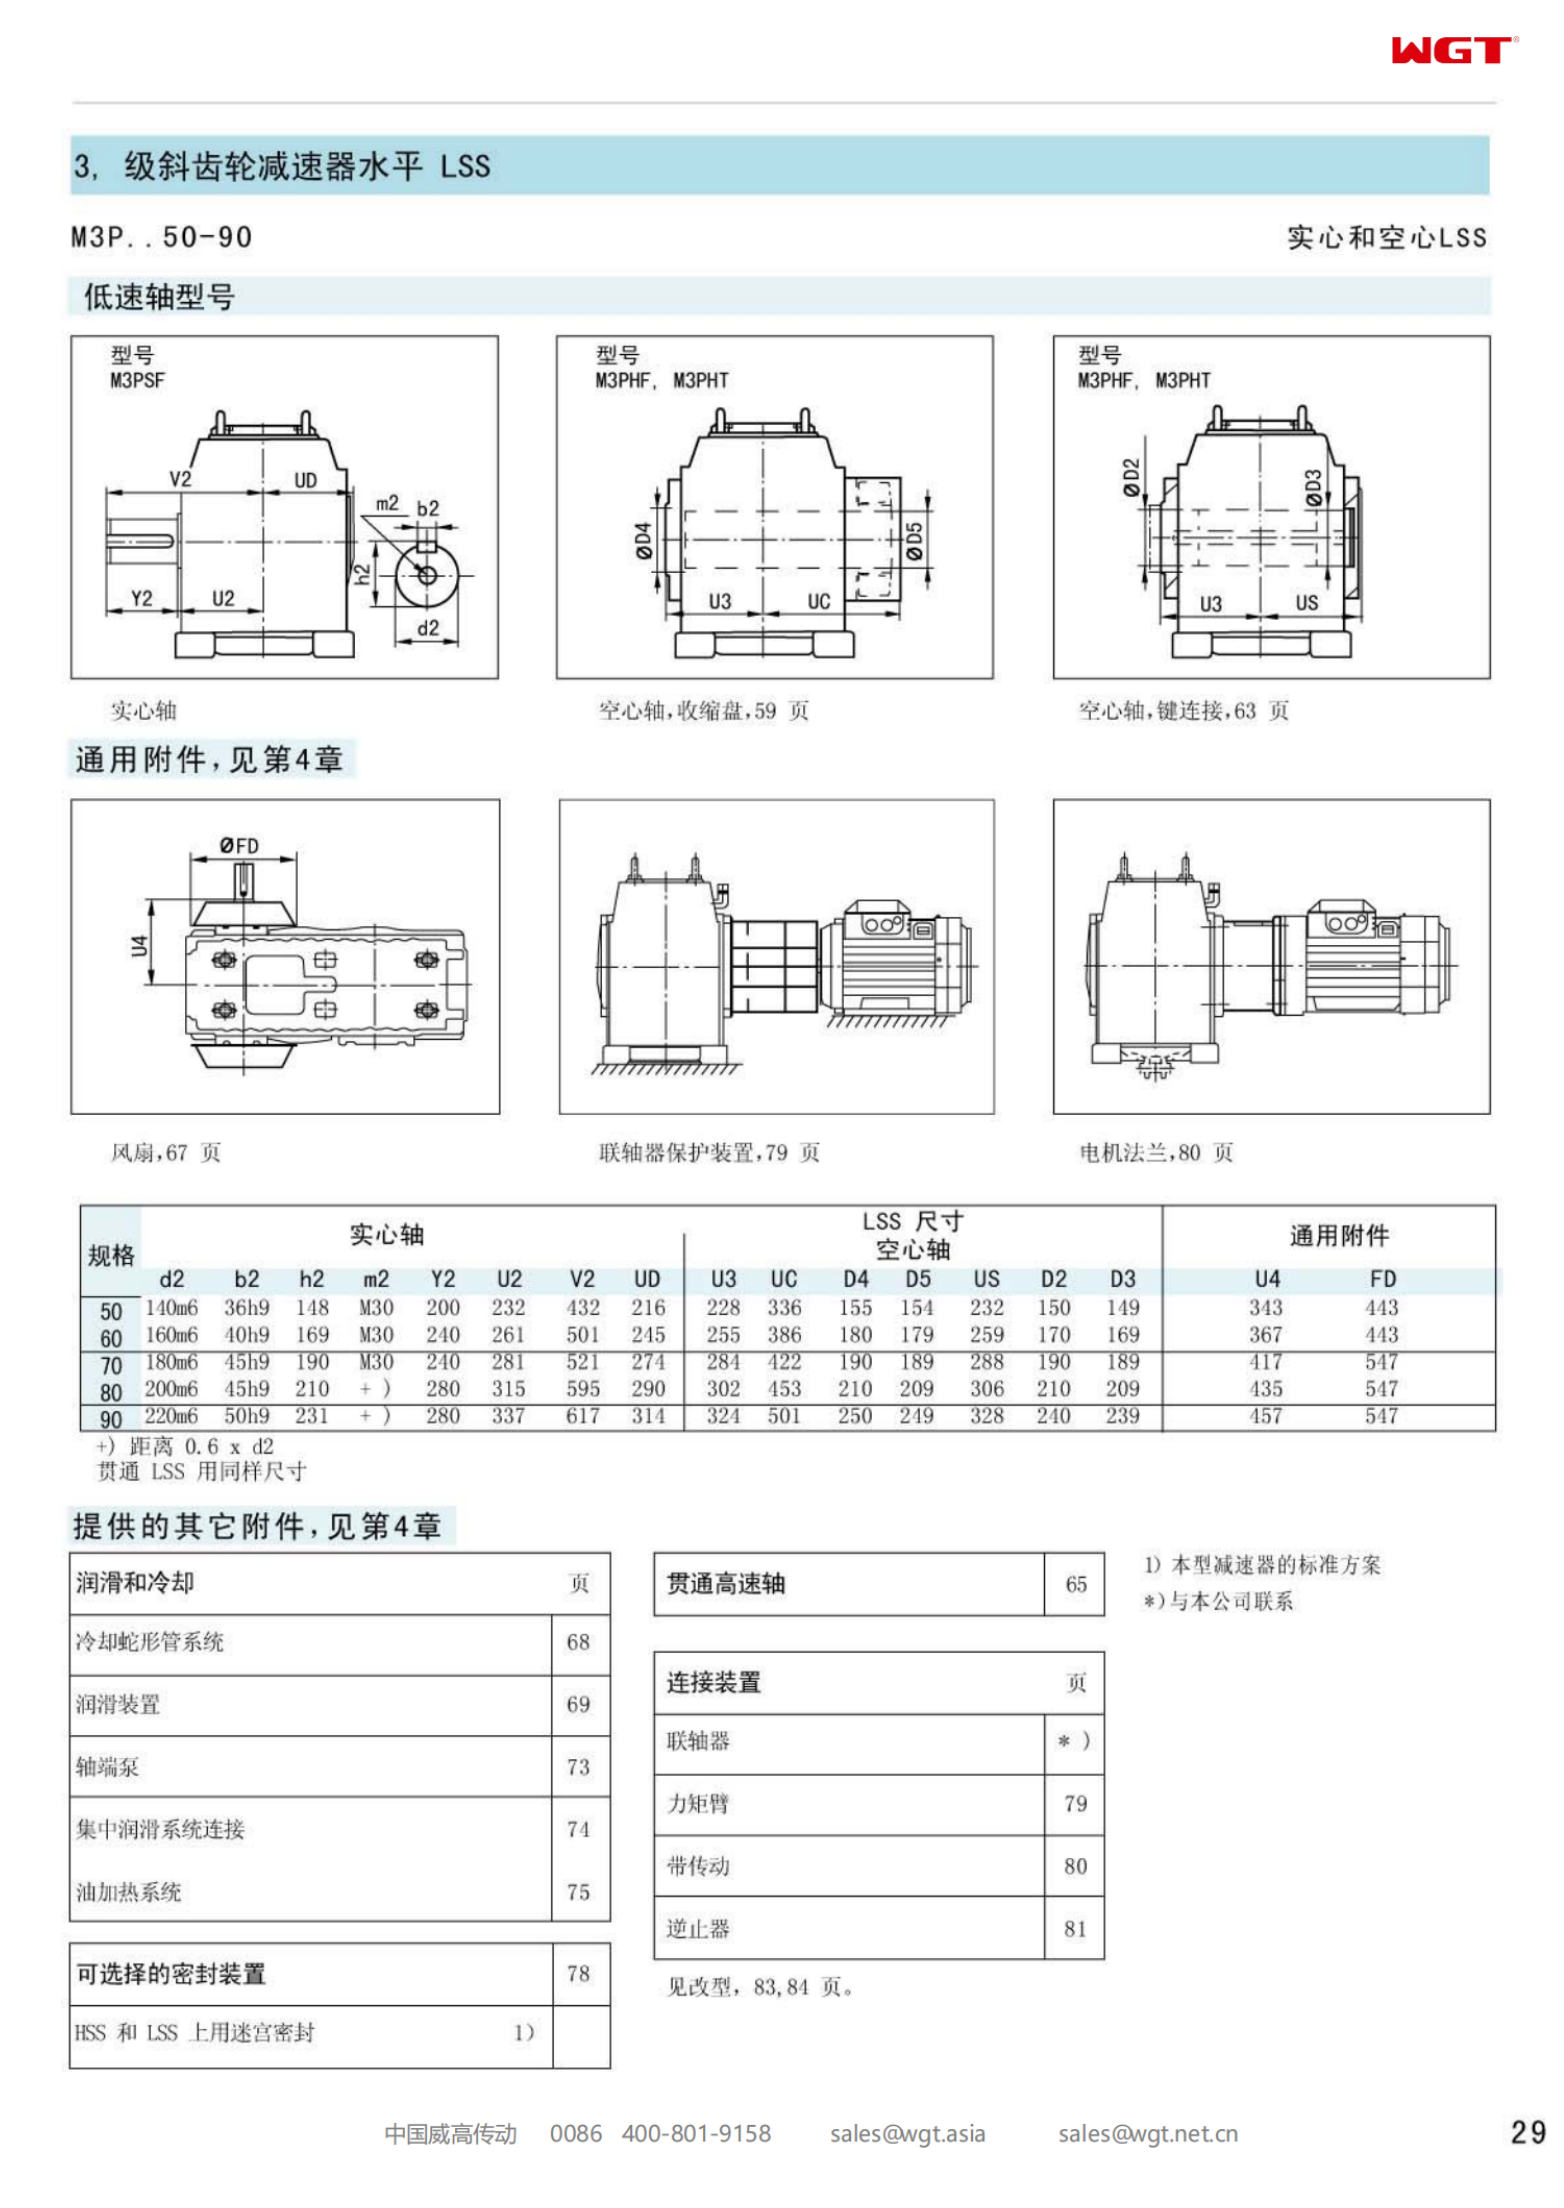 M3PHT60 Replace_SEW_M_Series Gearbox